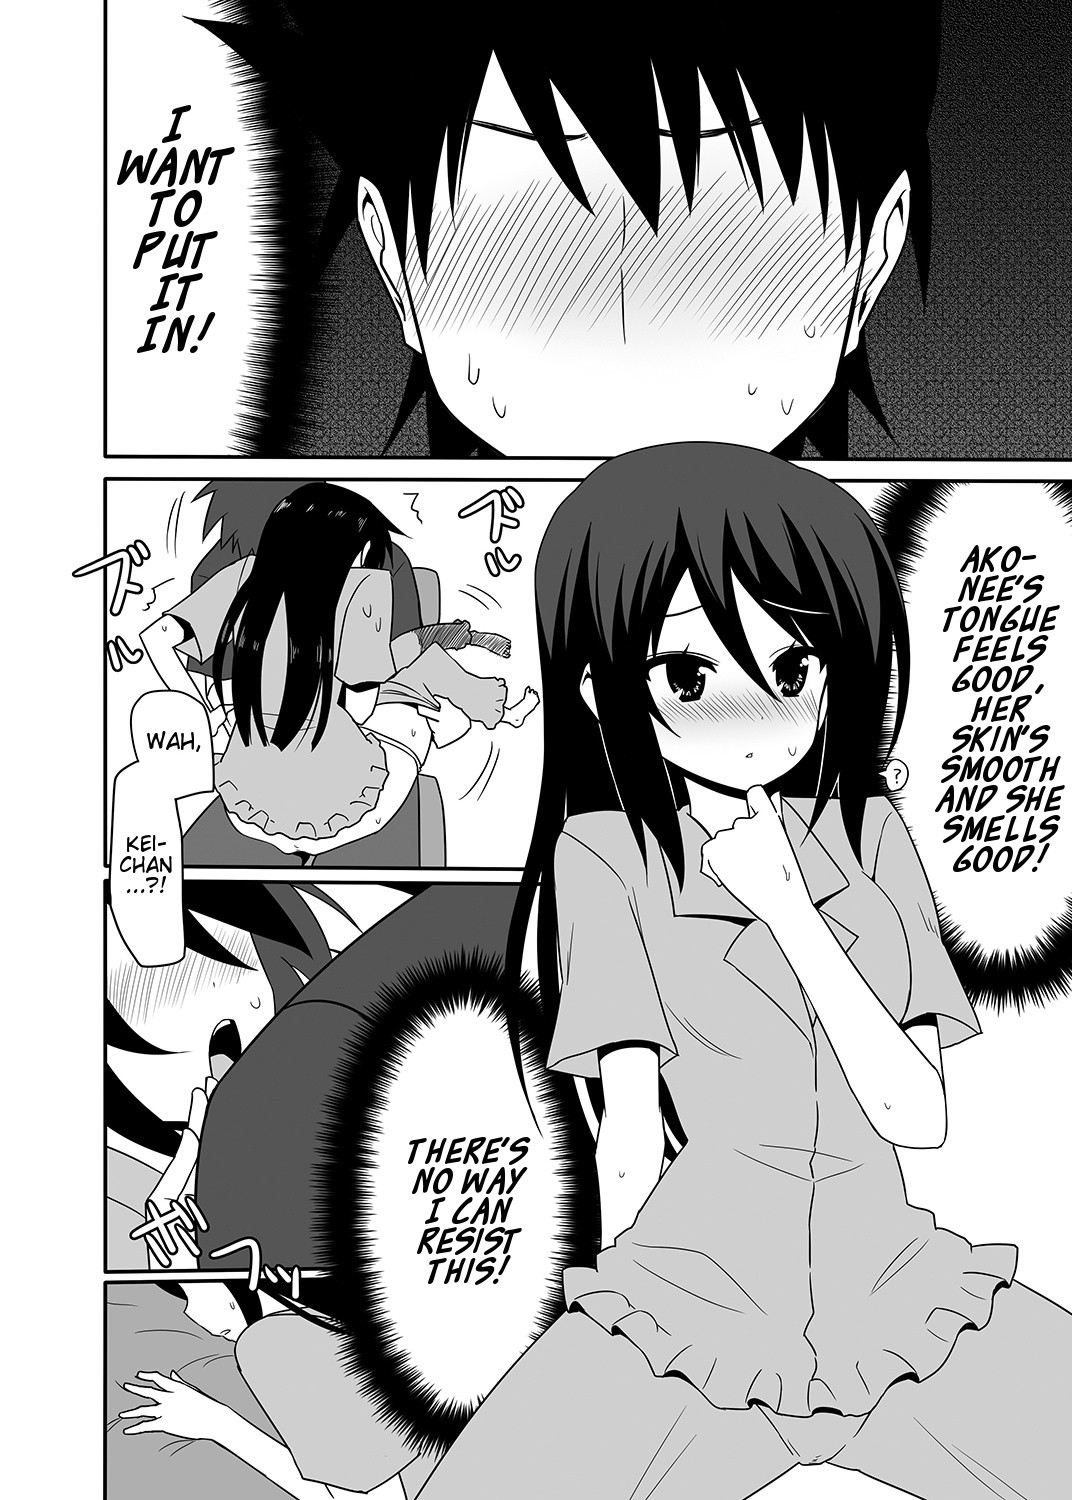 The day I went over the line with Ako-nee hentai manga picture 9